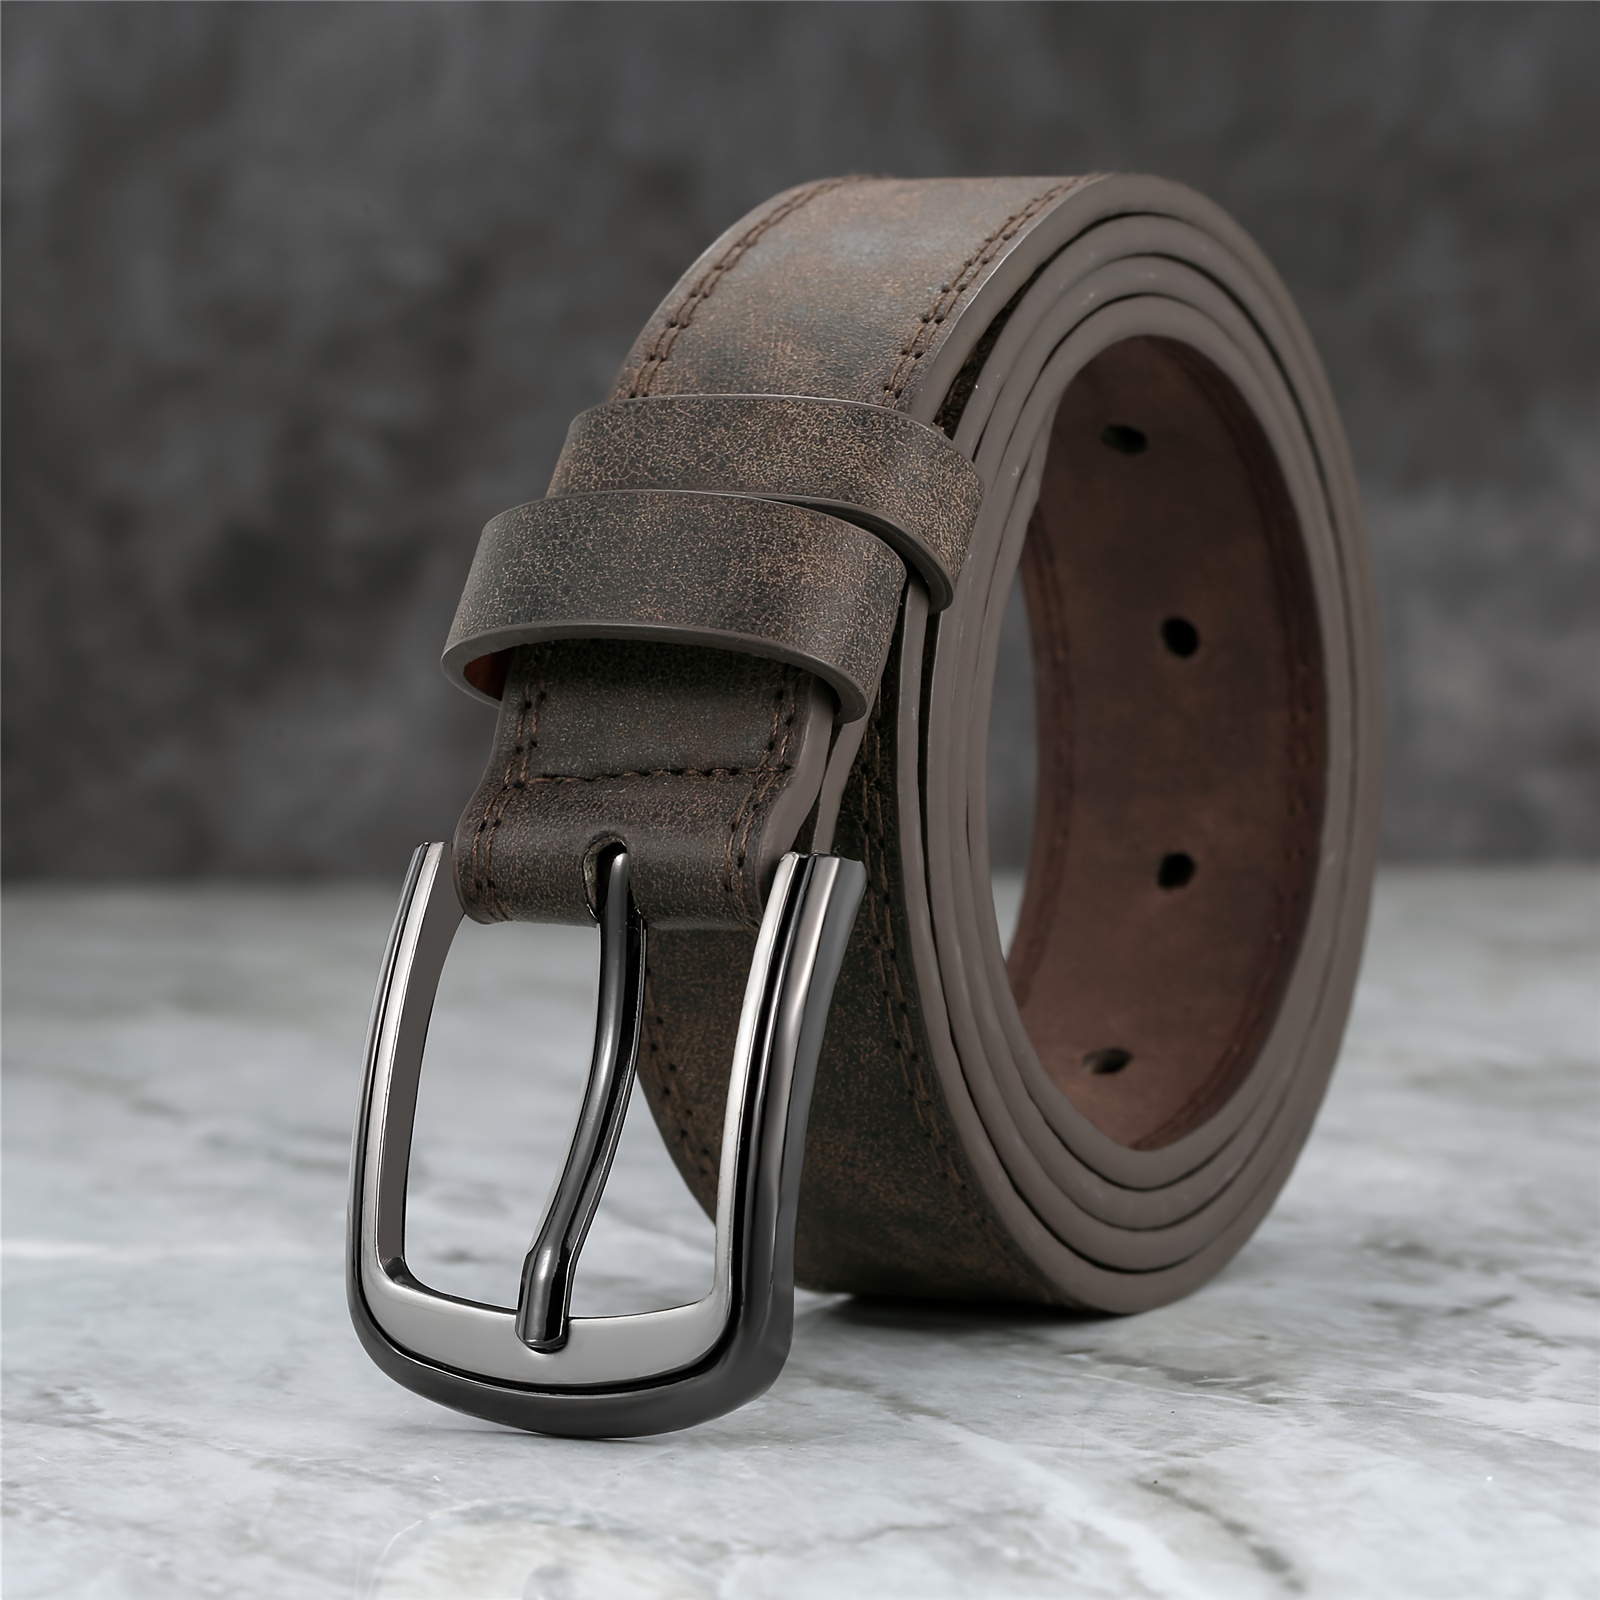 

Men's Wide Stitching Alloy Buckle Belt For Jeans And Trousers - Simple And Cool Sports Play Belt For Daily Decoration